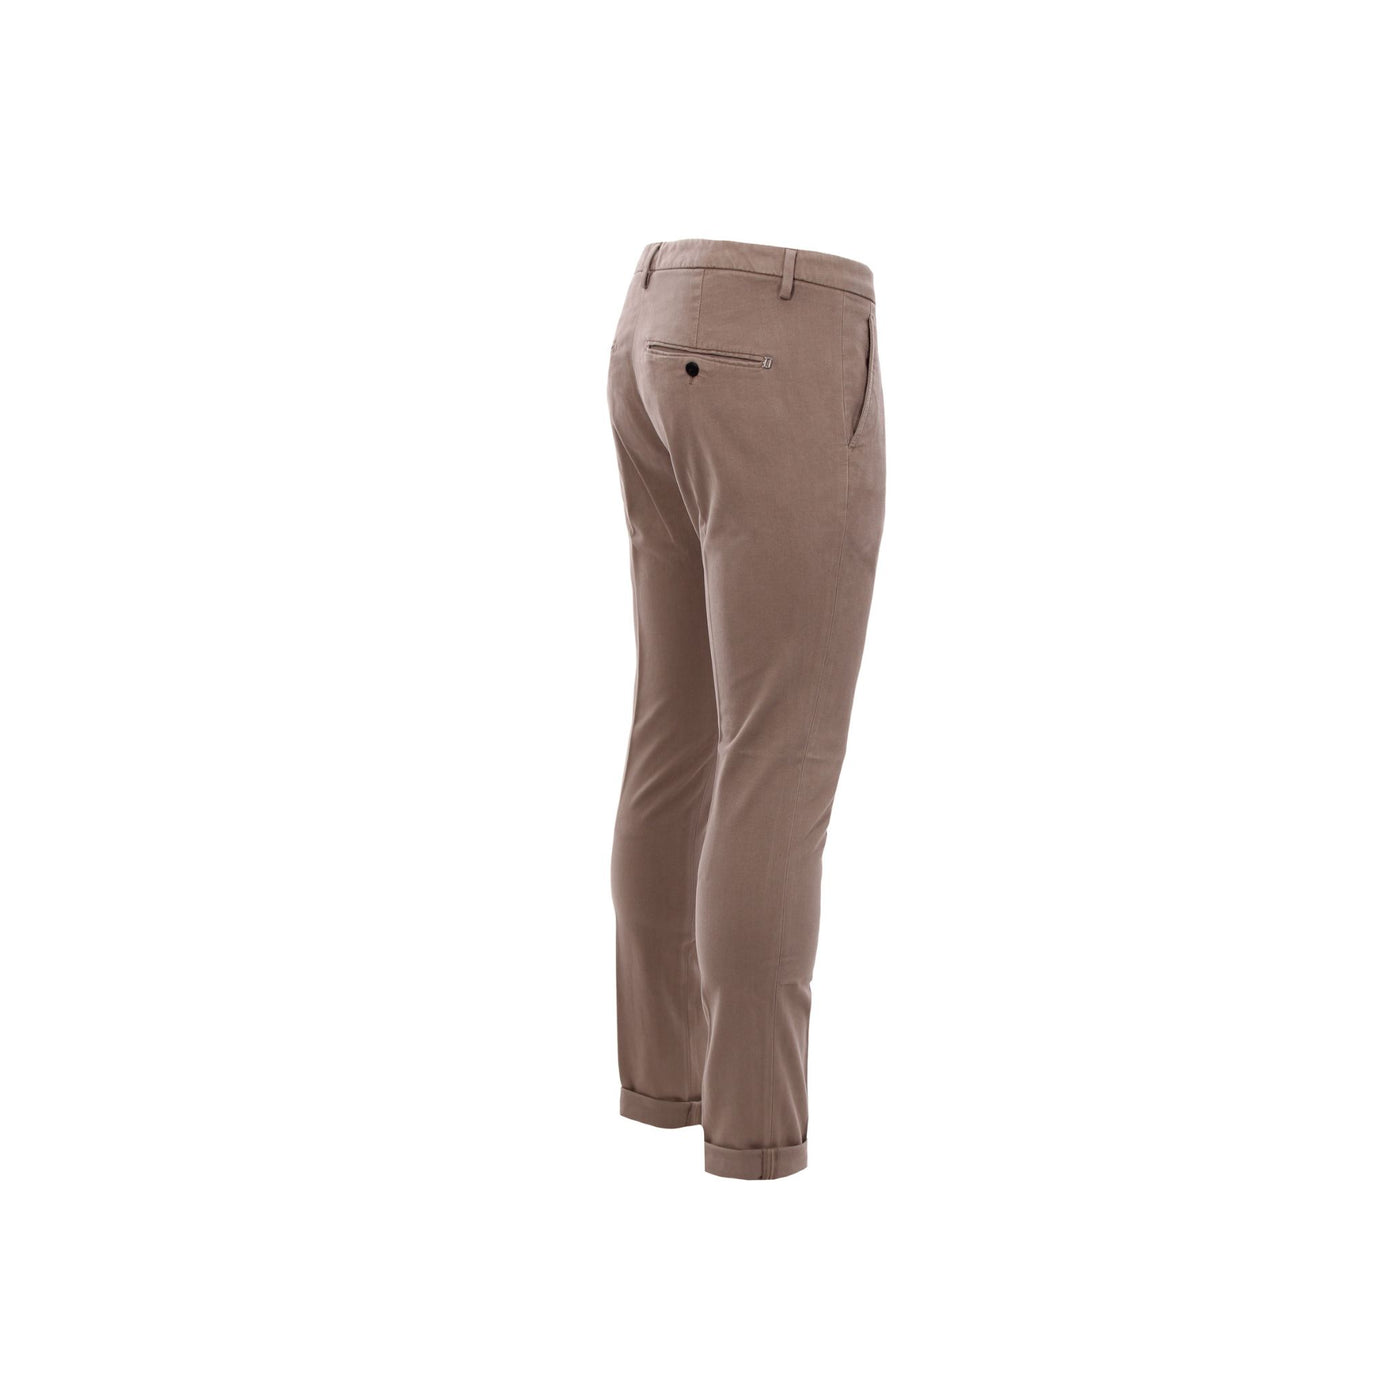 Men's trousers with concealed zip and button